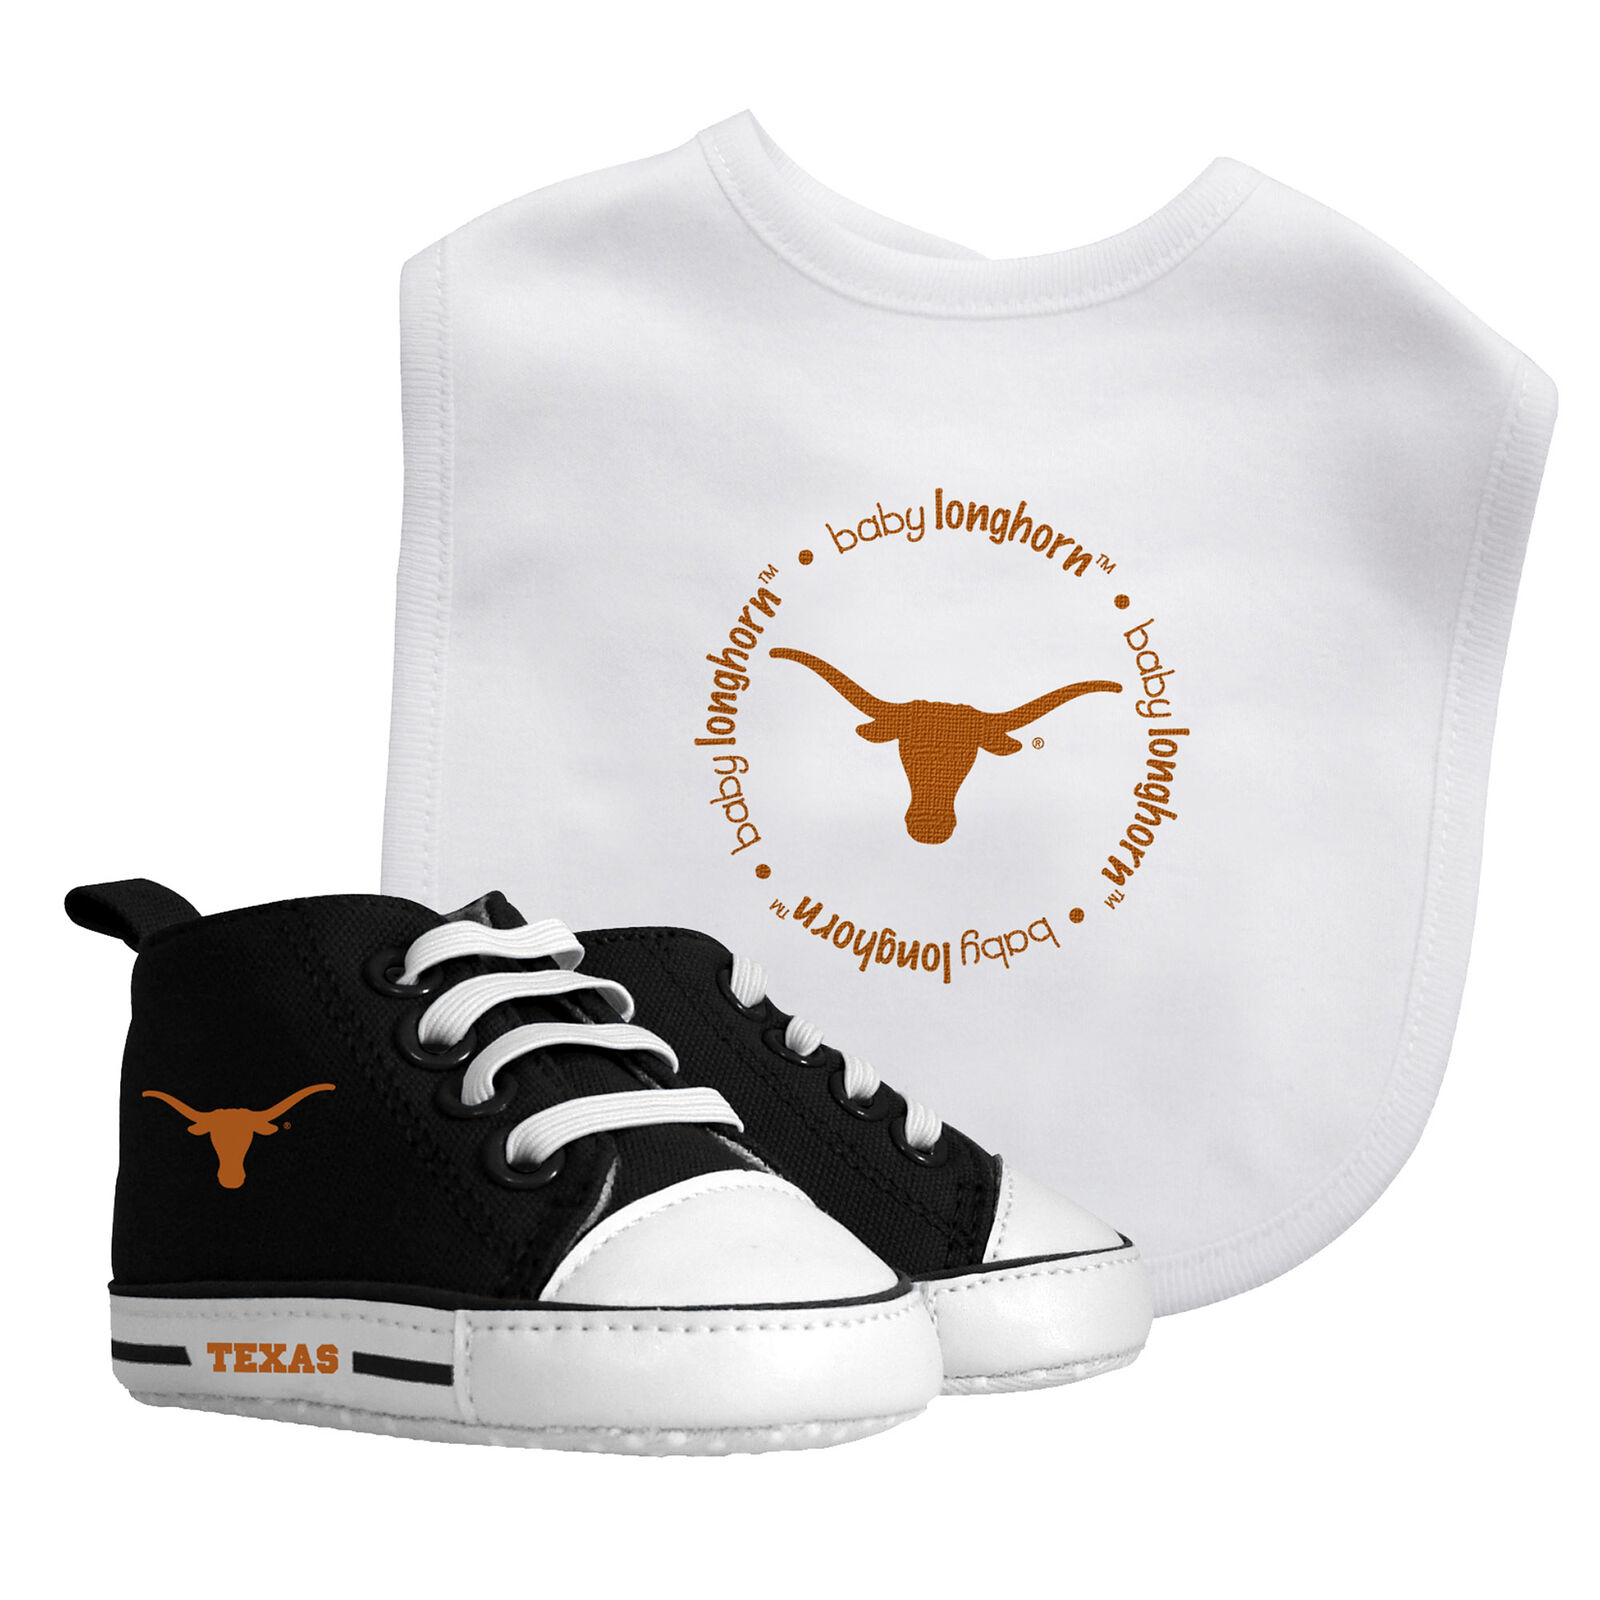 BabyFanatic - Texas Longhorns - Officially Licensed NCAA 2-Piece Gift Set